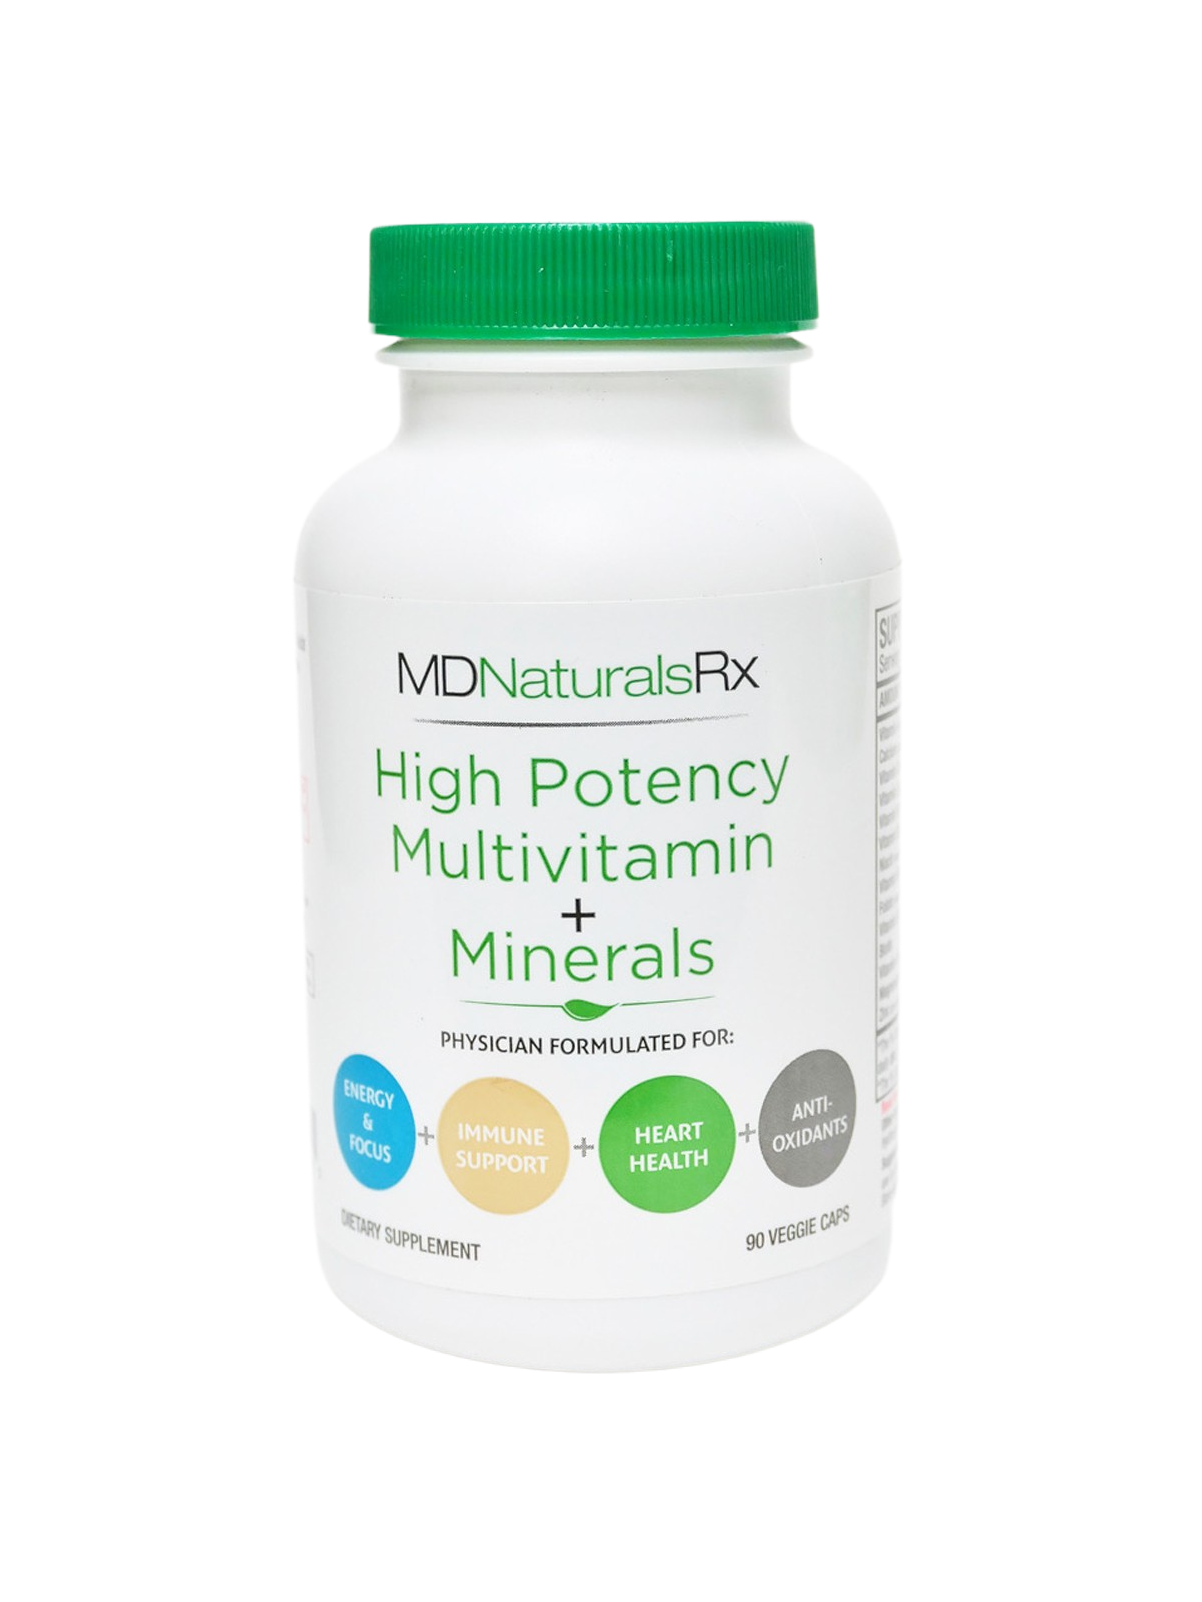 High Potency Multivitamin + Minerals - MDNaturalsRx | Physician-Formulated, All Natural Supplements